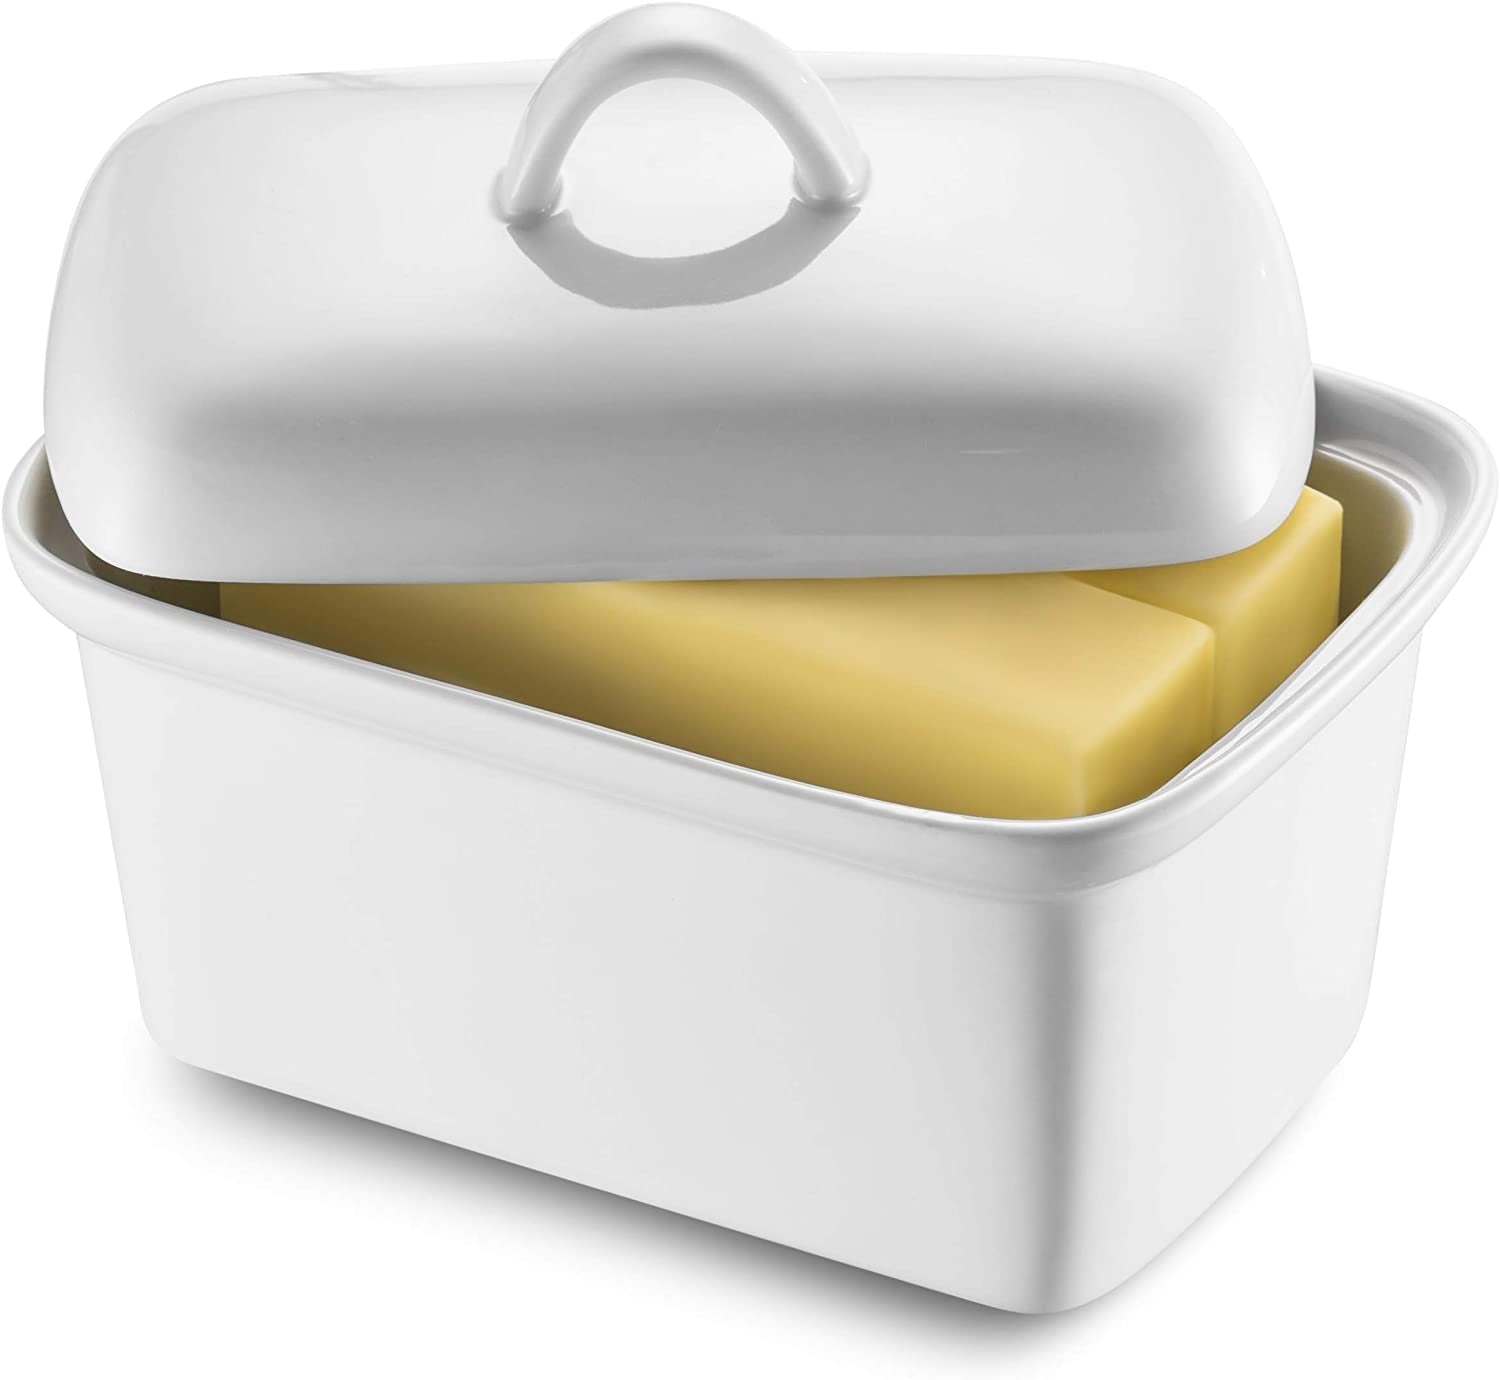 GOURMEX Large Butter Box with Lid | Fits One Pound of Butter